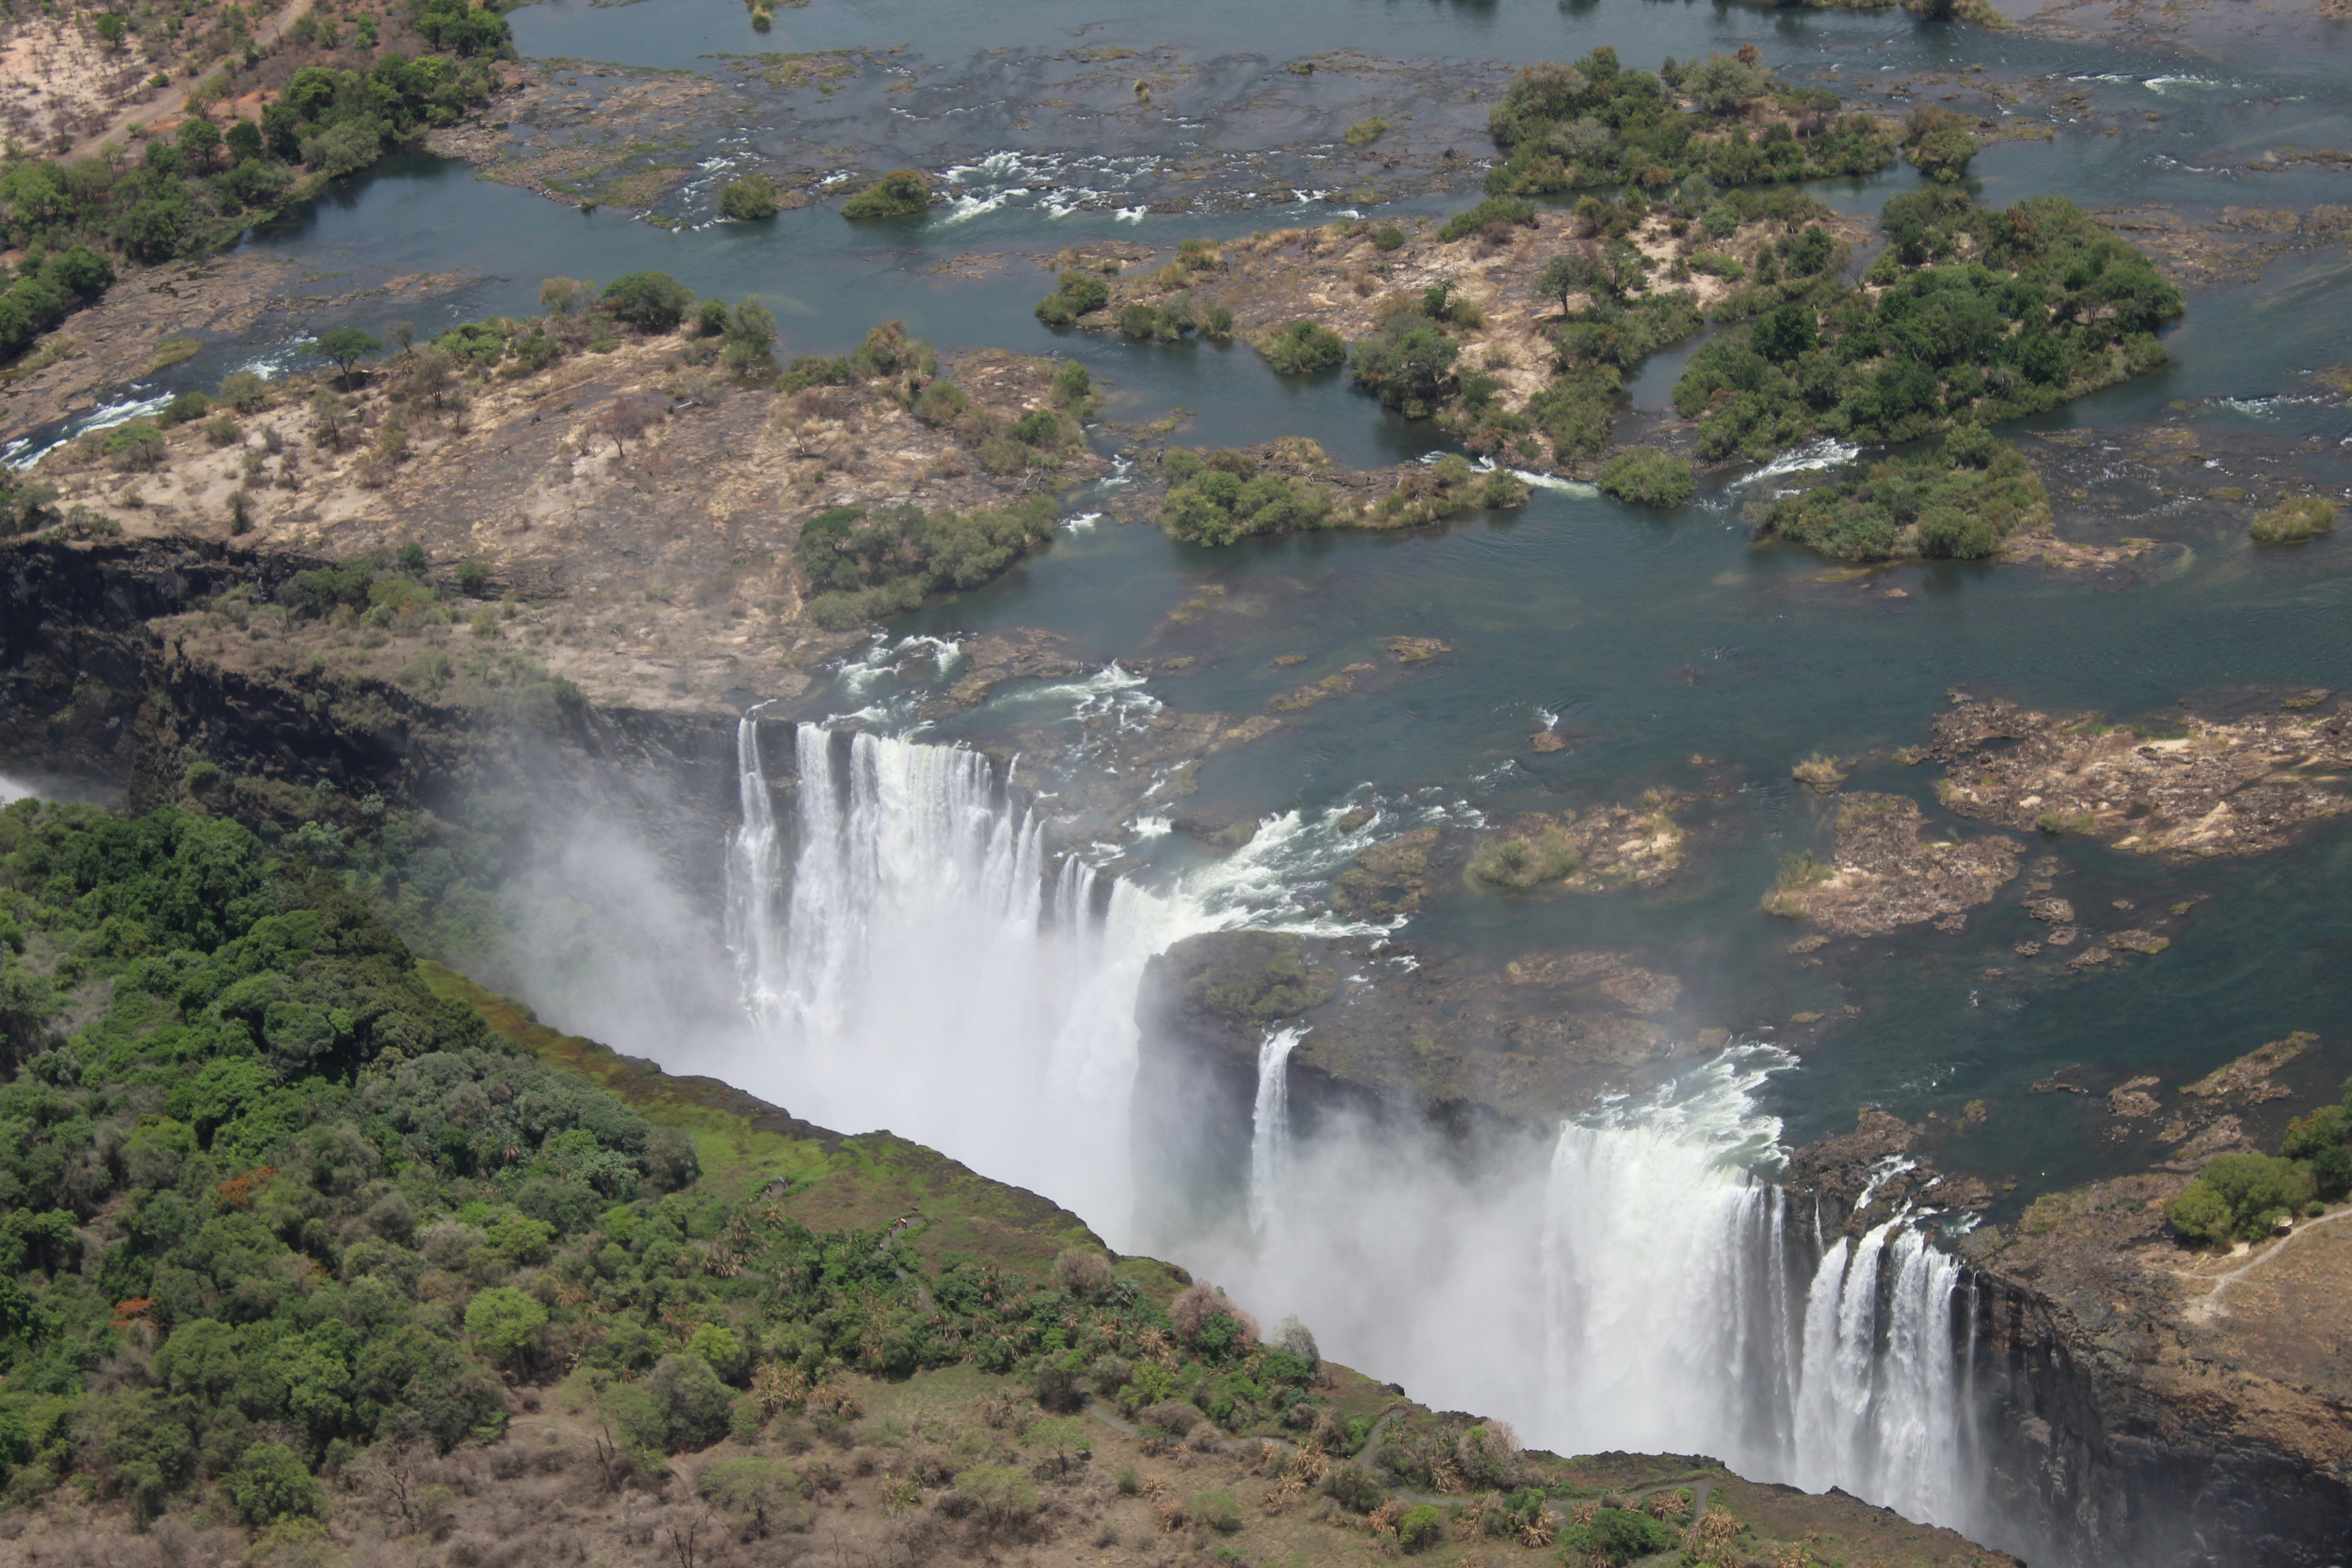 An aerial photo taken by the Zambezi Helicopter Company on December 9th, 2019 shows several columns of white water spilling over Victoria Falls in Zimbabwe